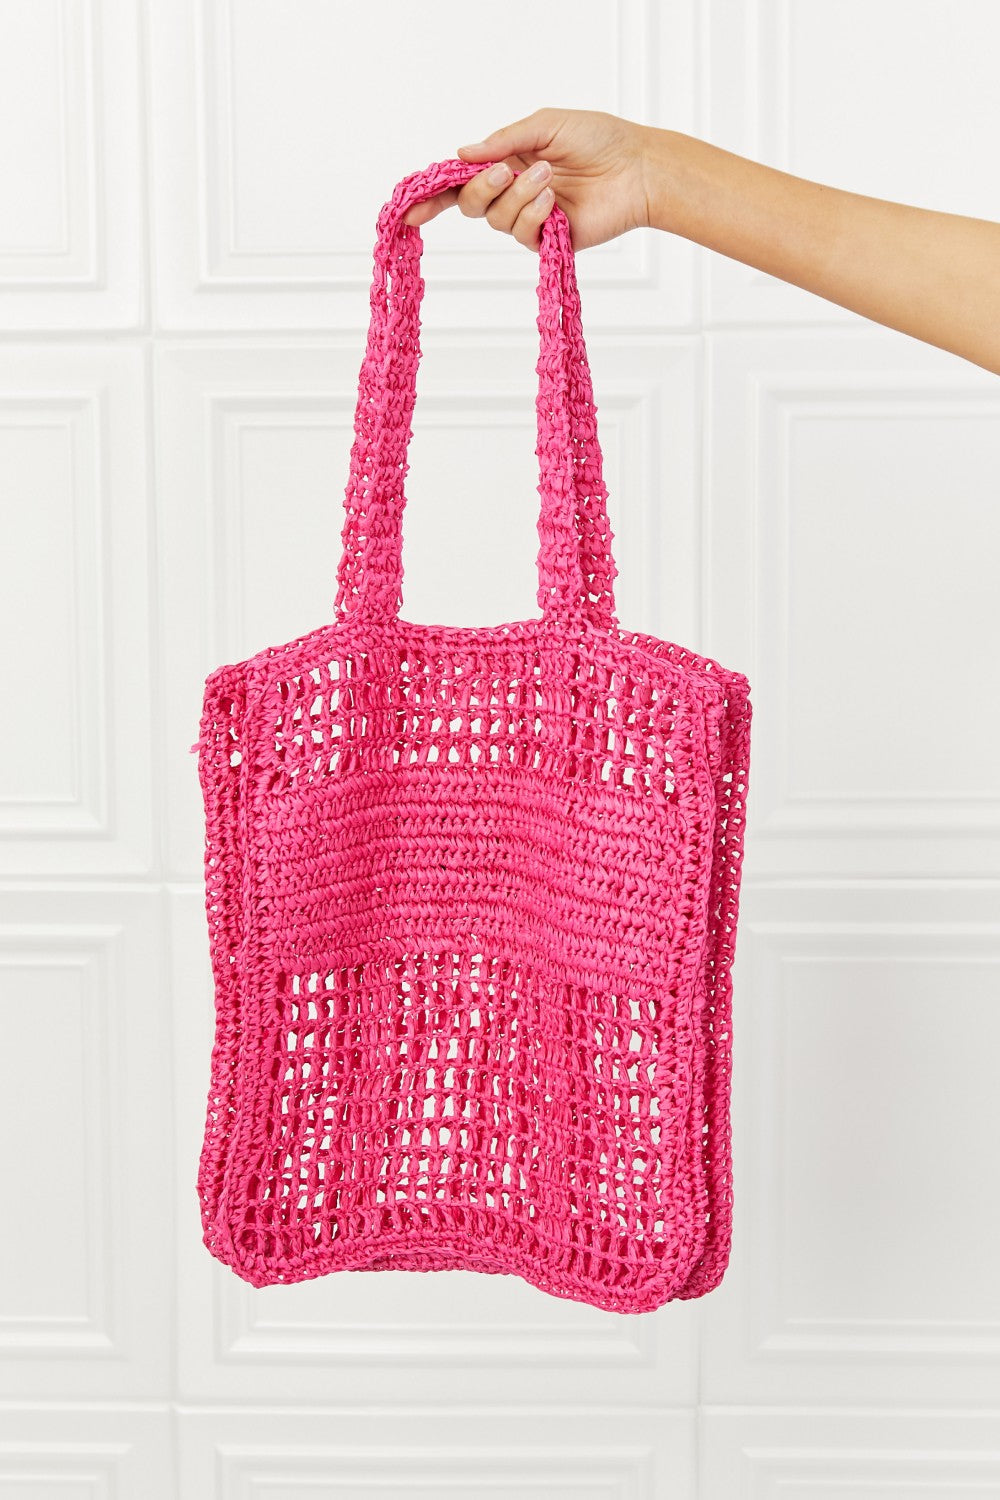 Fame Tropic Babe Staw Tote Bag - Online Only